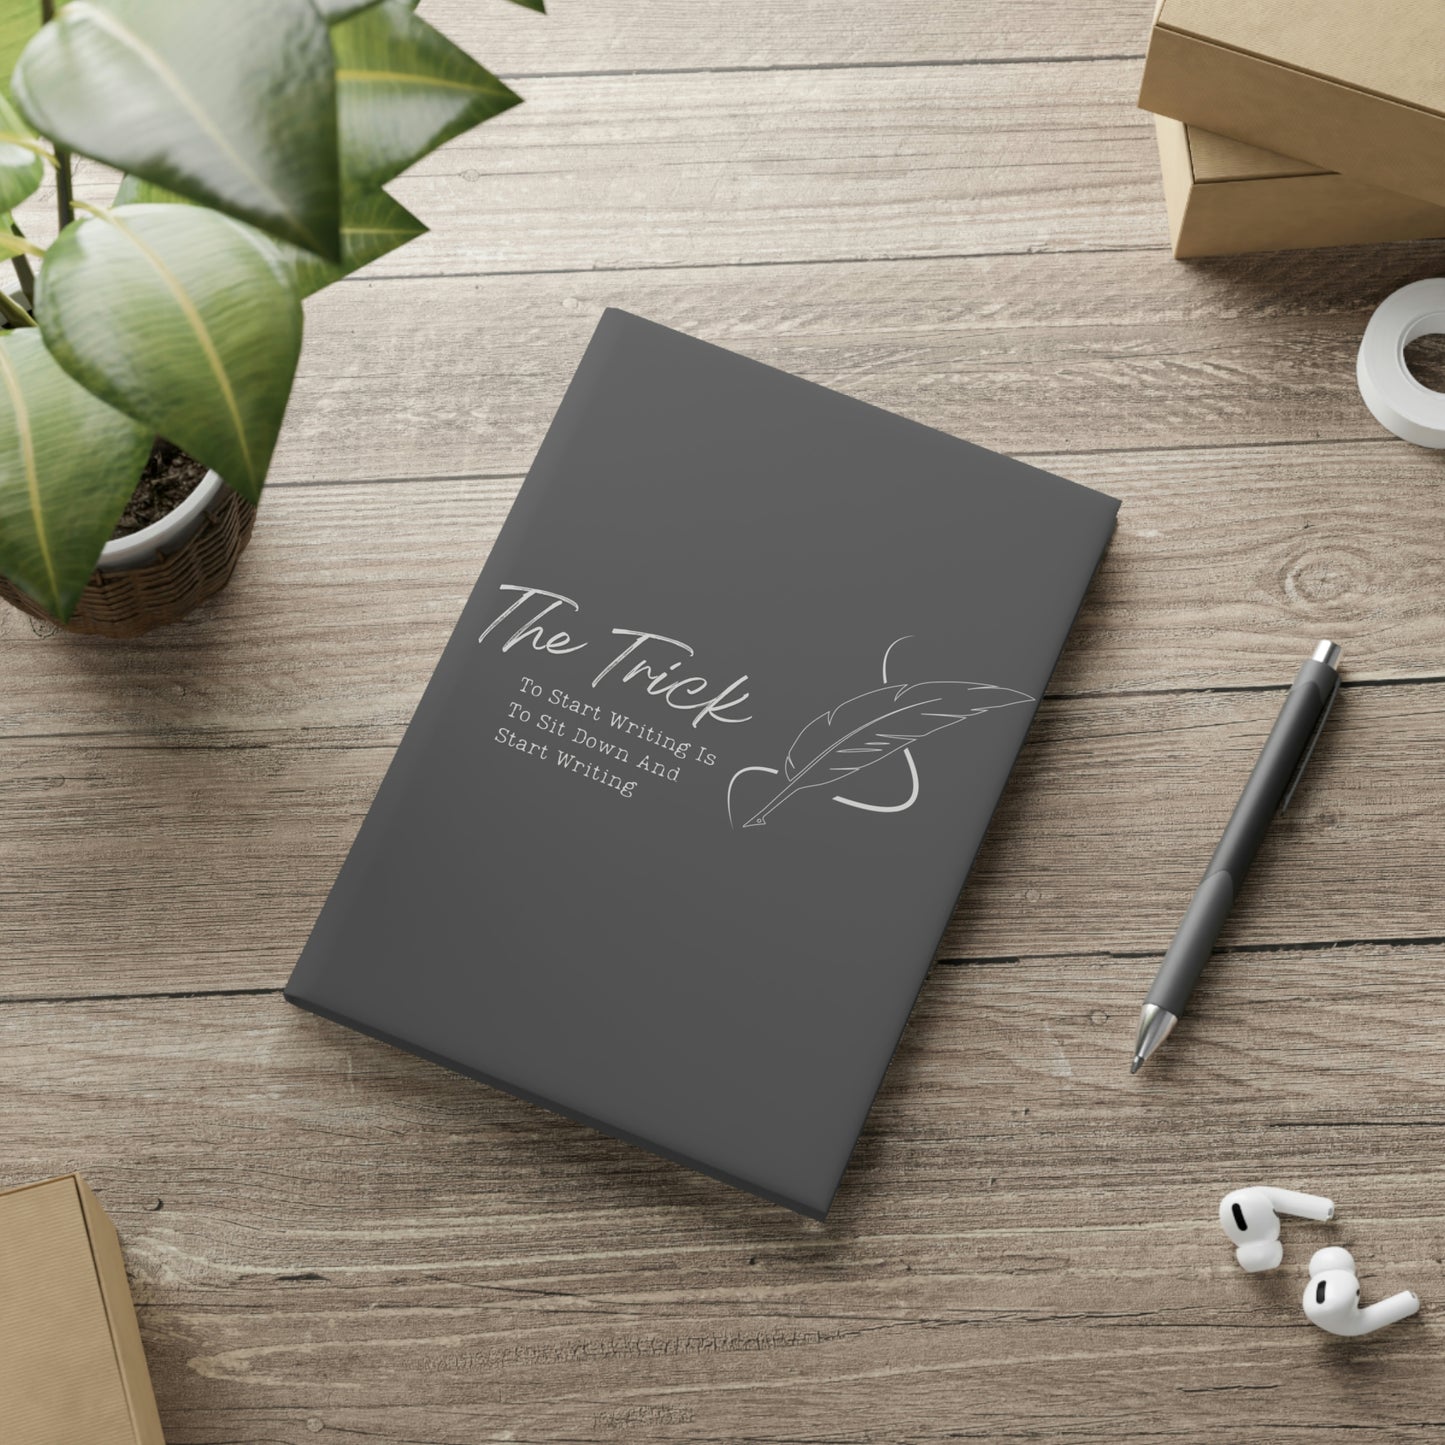 The trick to getting started is to get started // Write Out Loud // Hardcover Notebook with Puffy Covers (Gray)